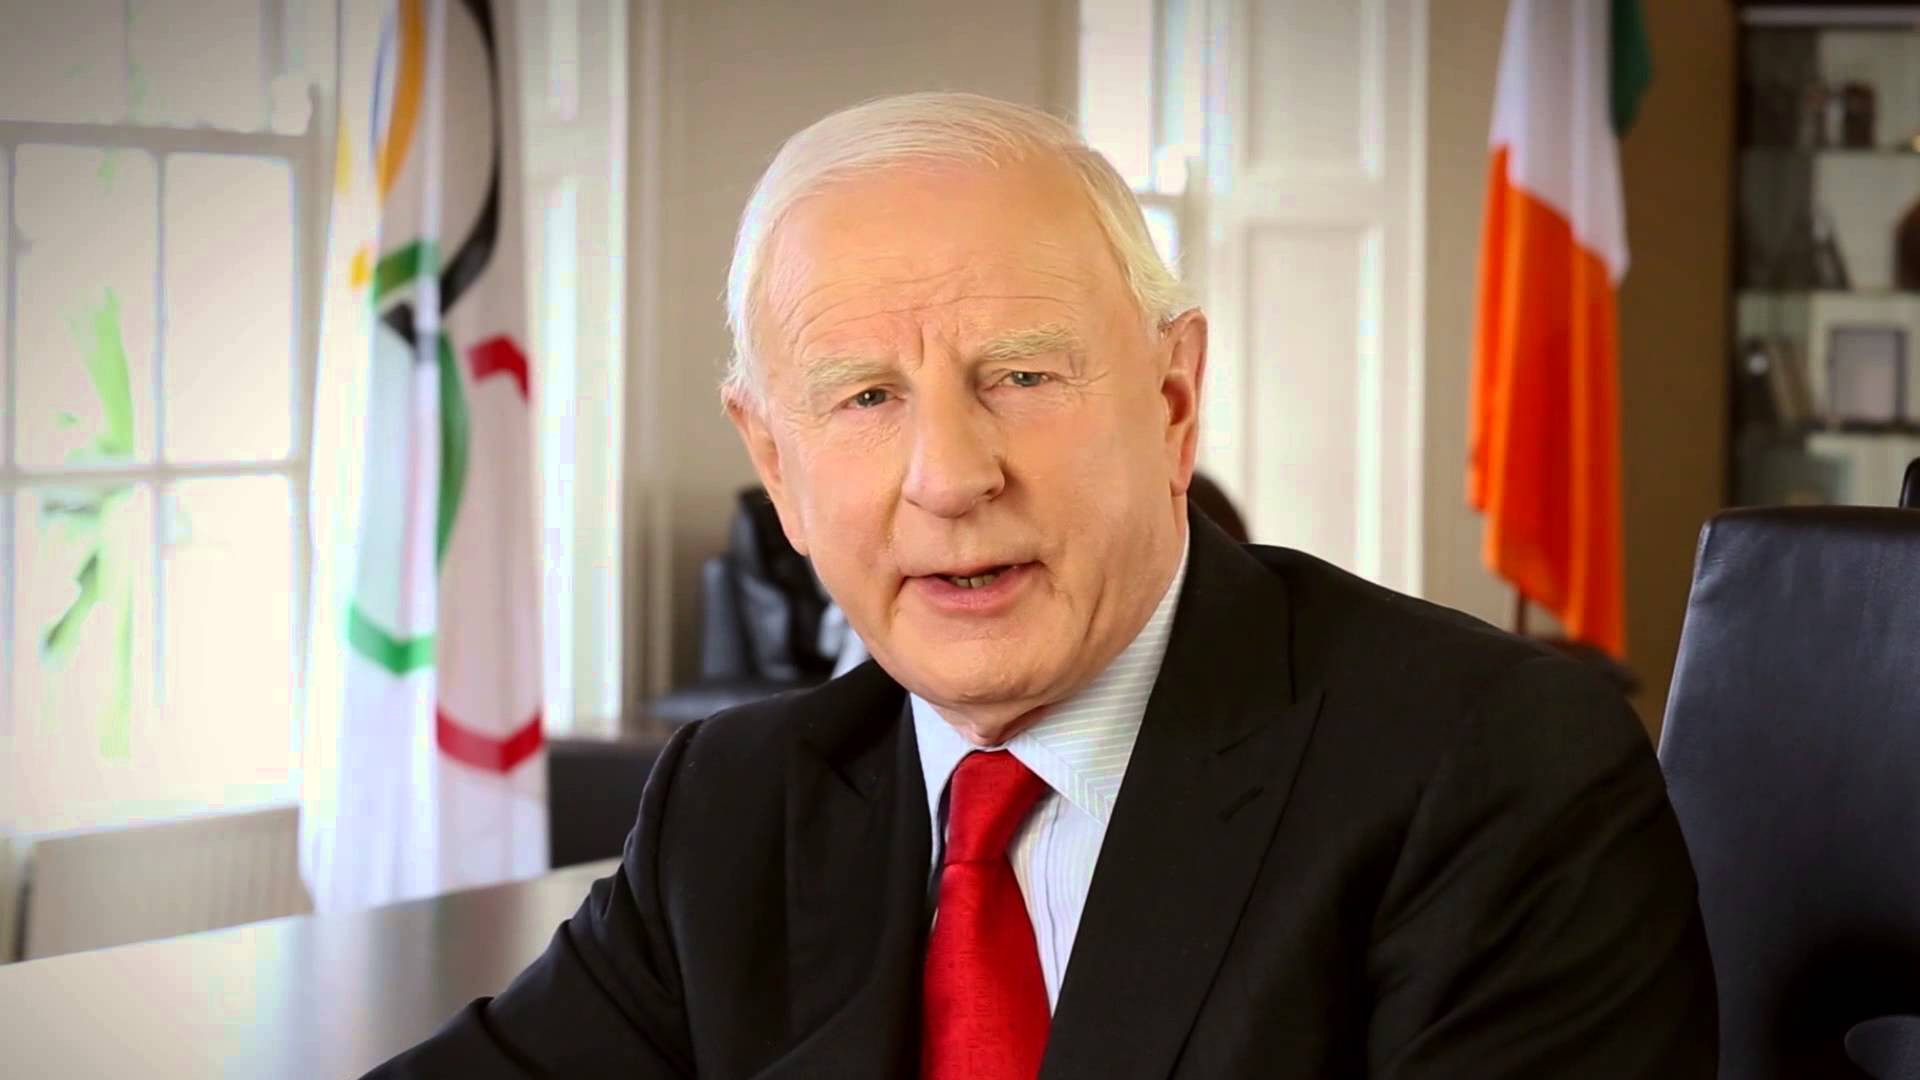 Former OCI President Patrick Hickey negotiated the deal without the approval of the Executive Board ©YouTube